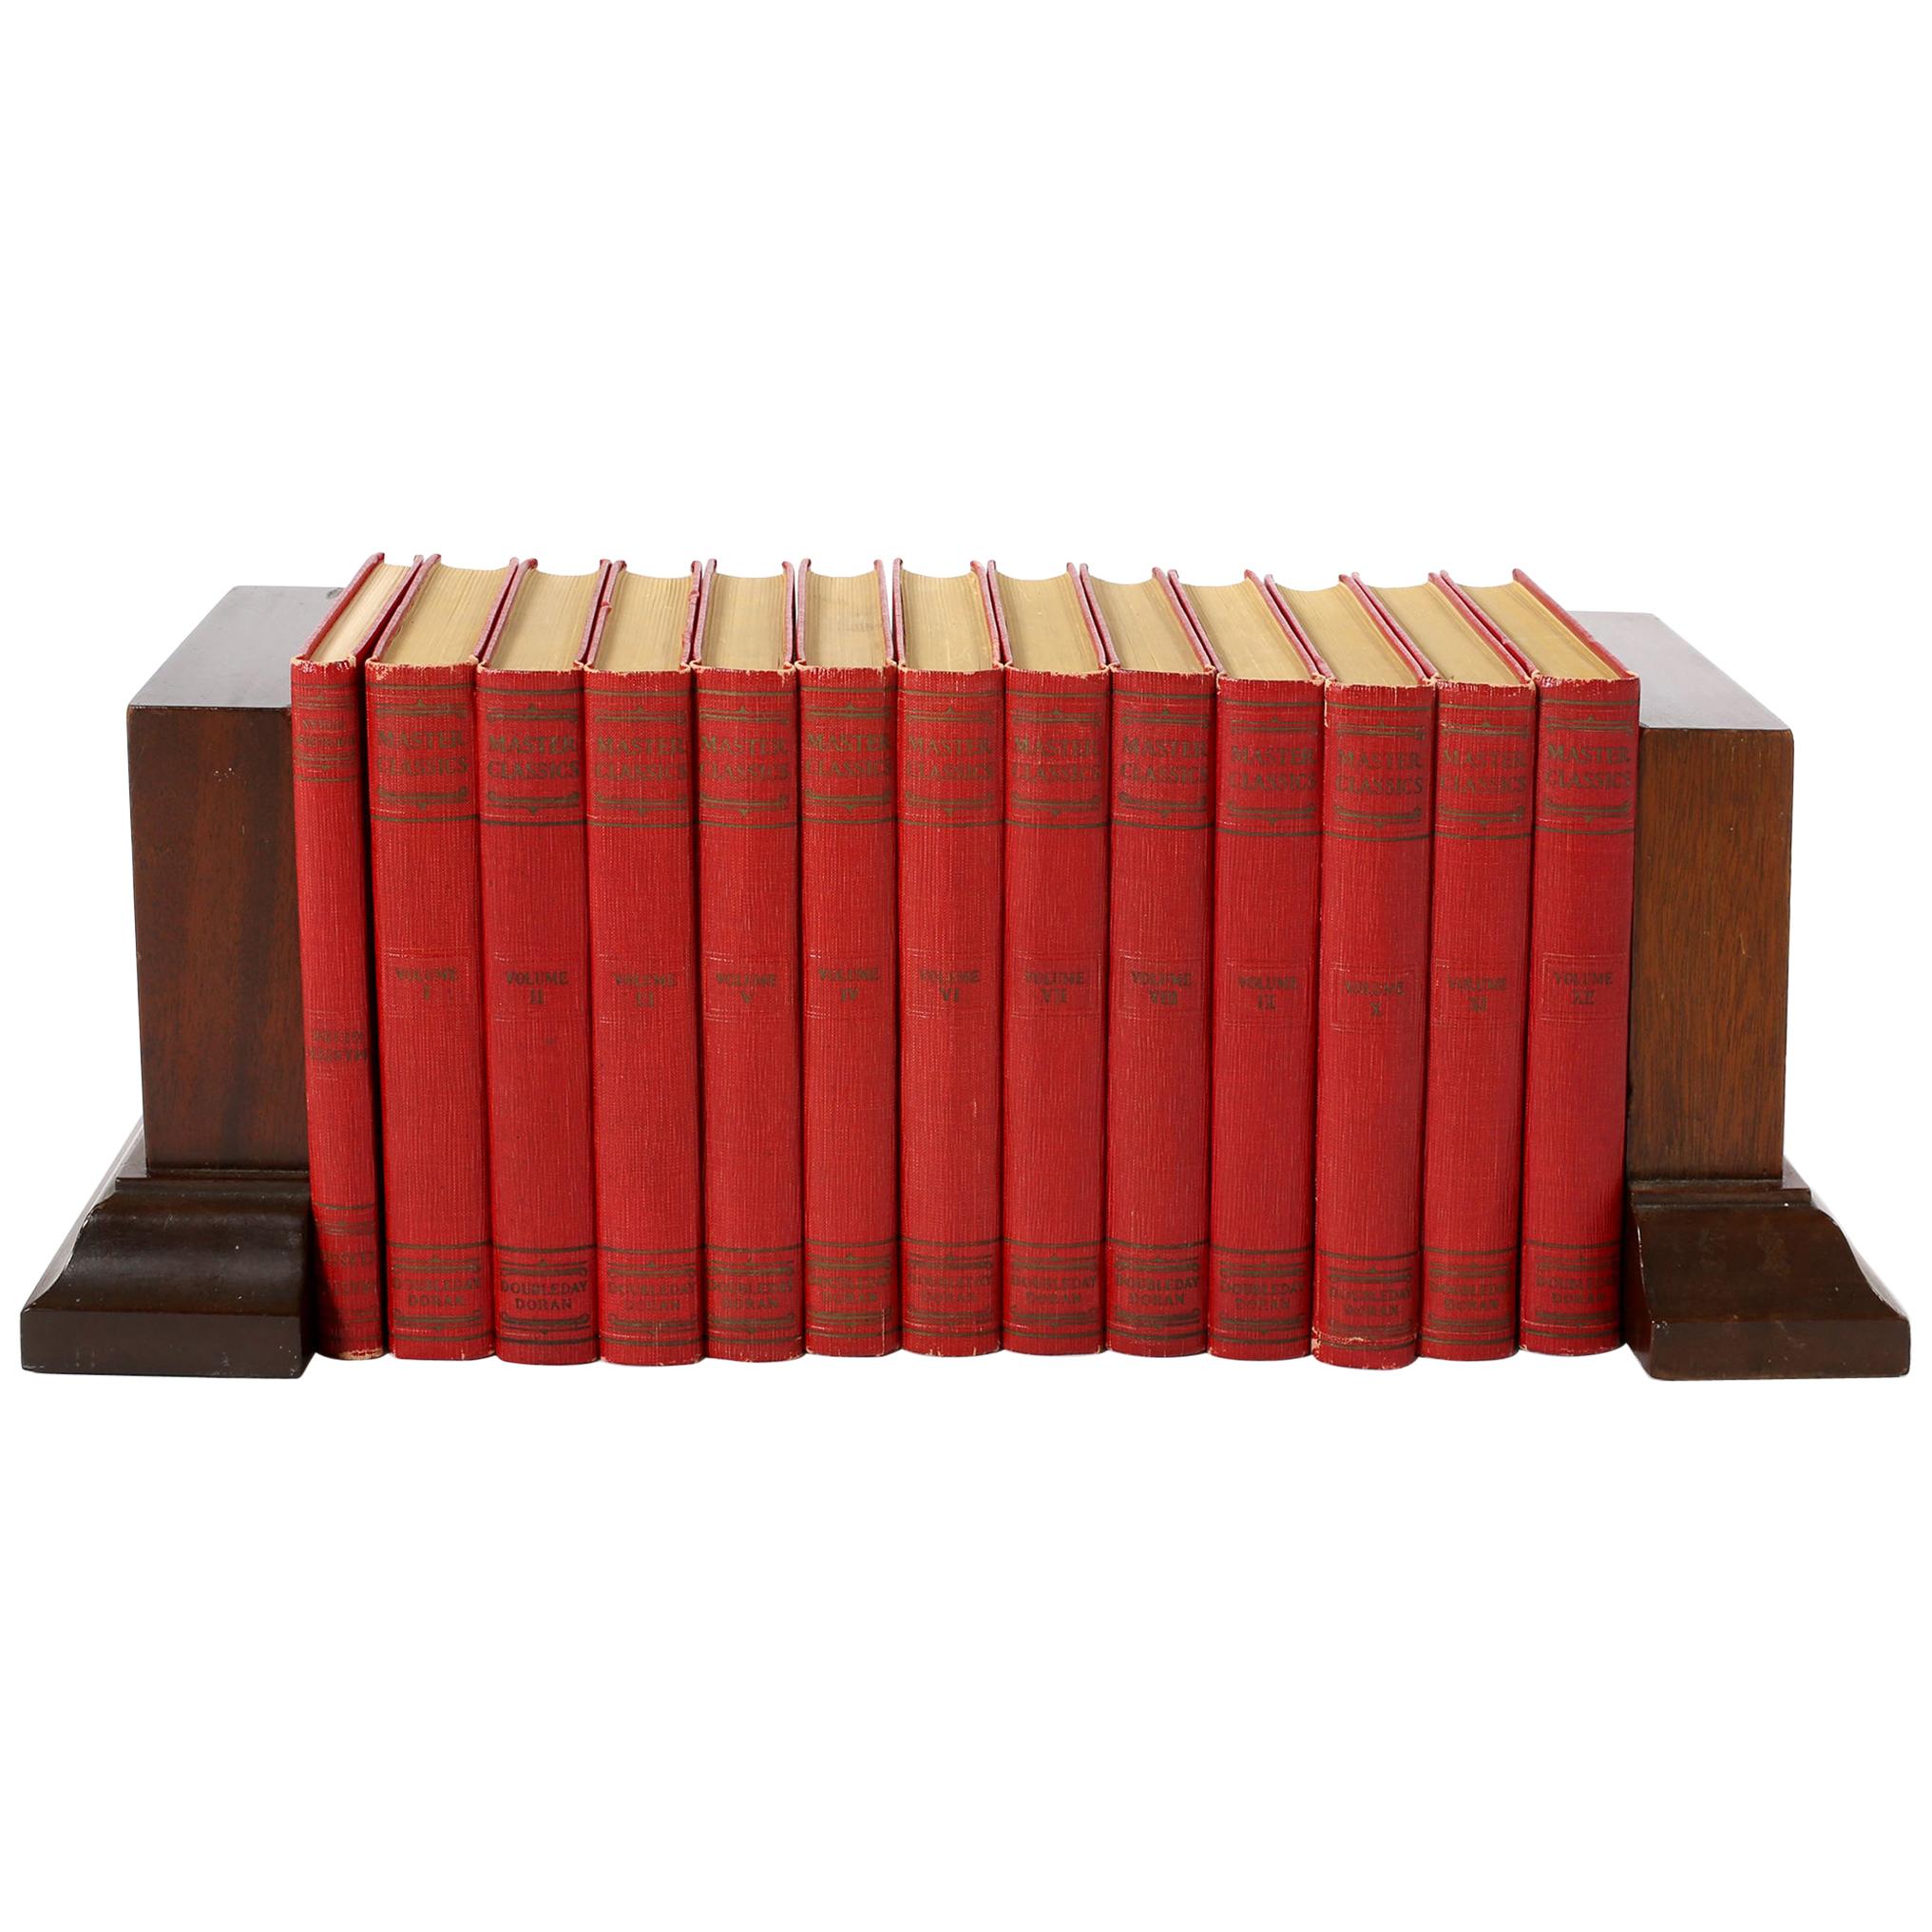 Collection Leather Bound Books / Thirteen Volumes